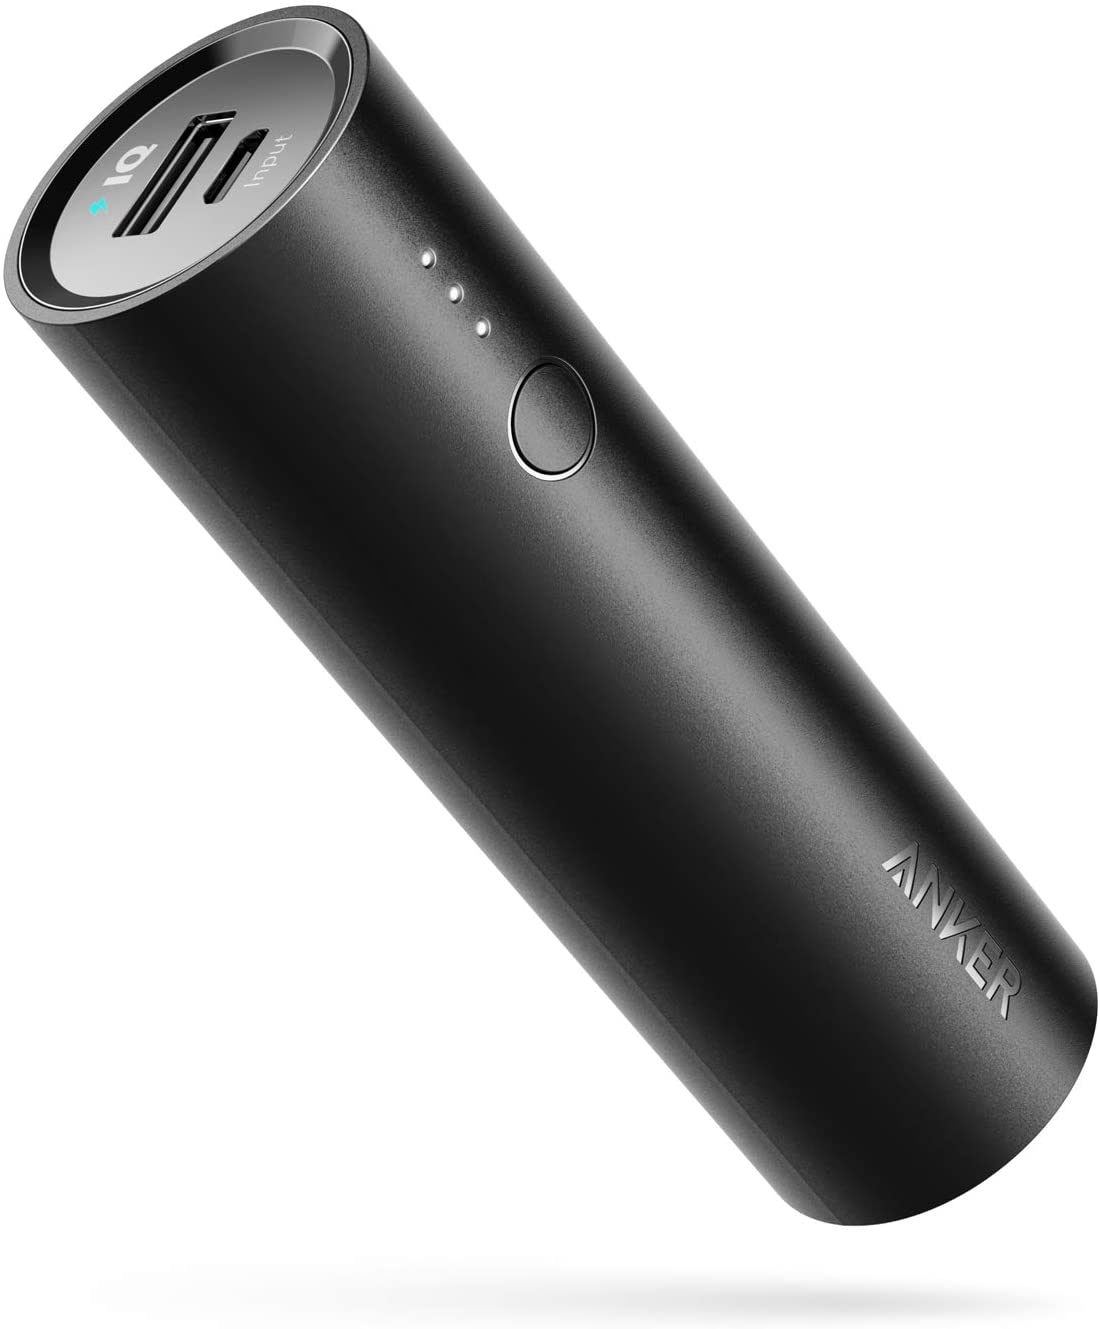 Anker PowerCore 5000mAh Portable Charger Ultra-Compact